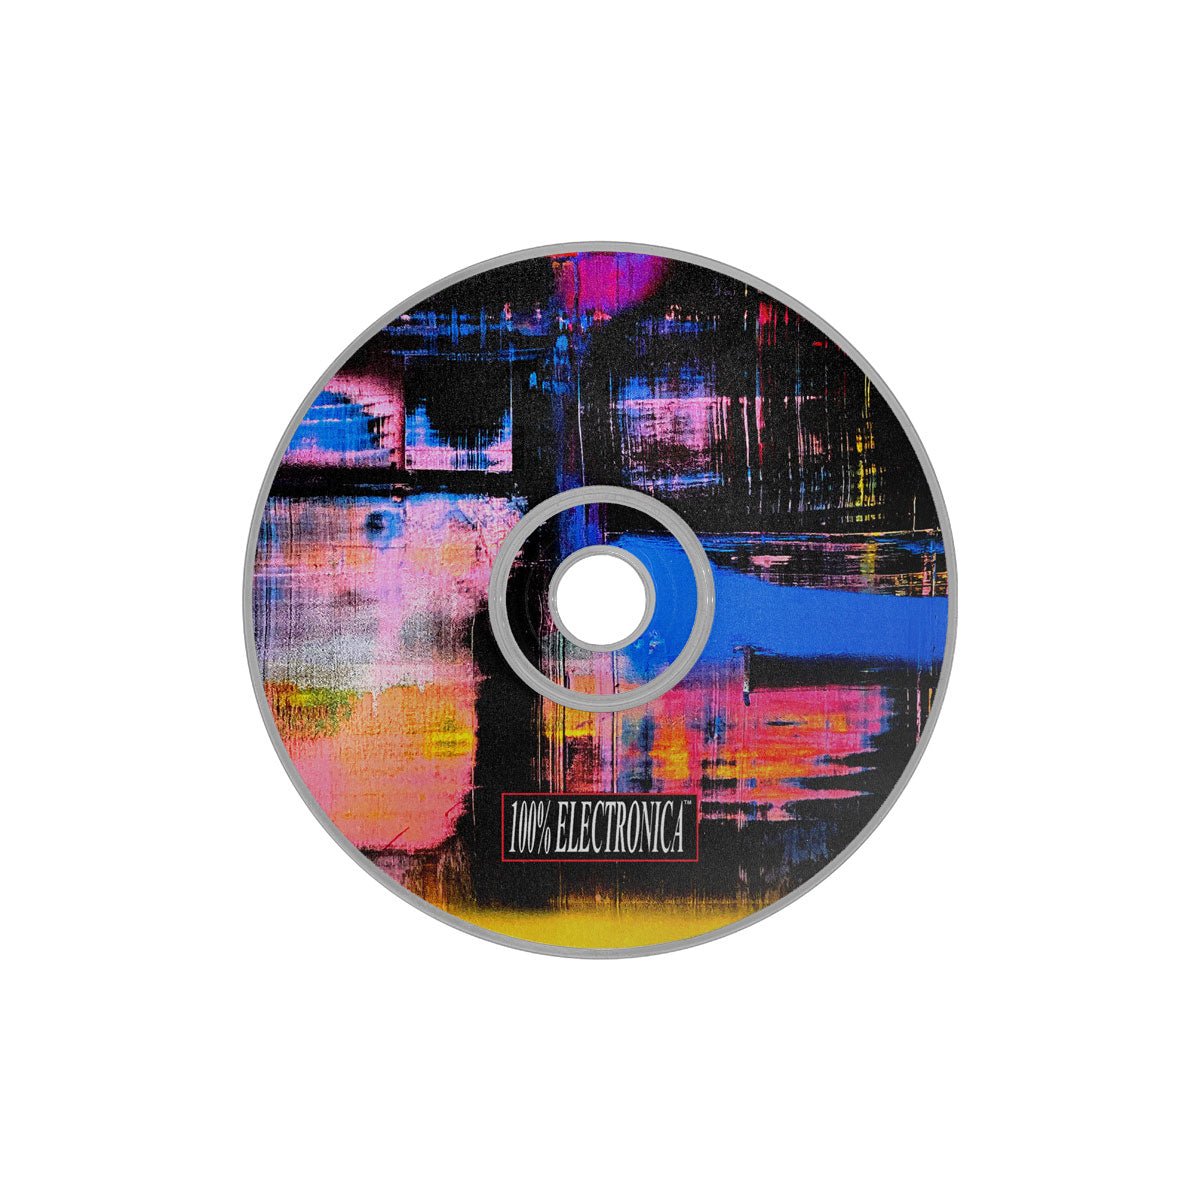 PICTUREPLANE - Dopamine CD - 100% Electronica Official Store (Photo 2)